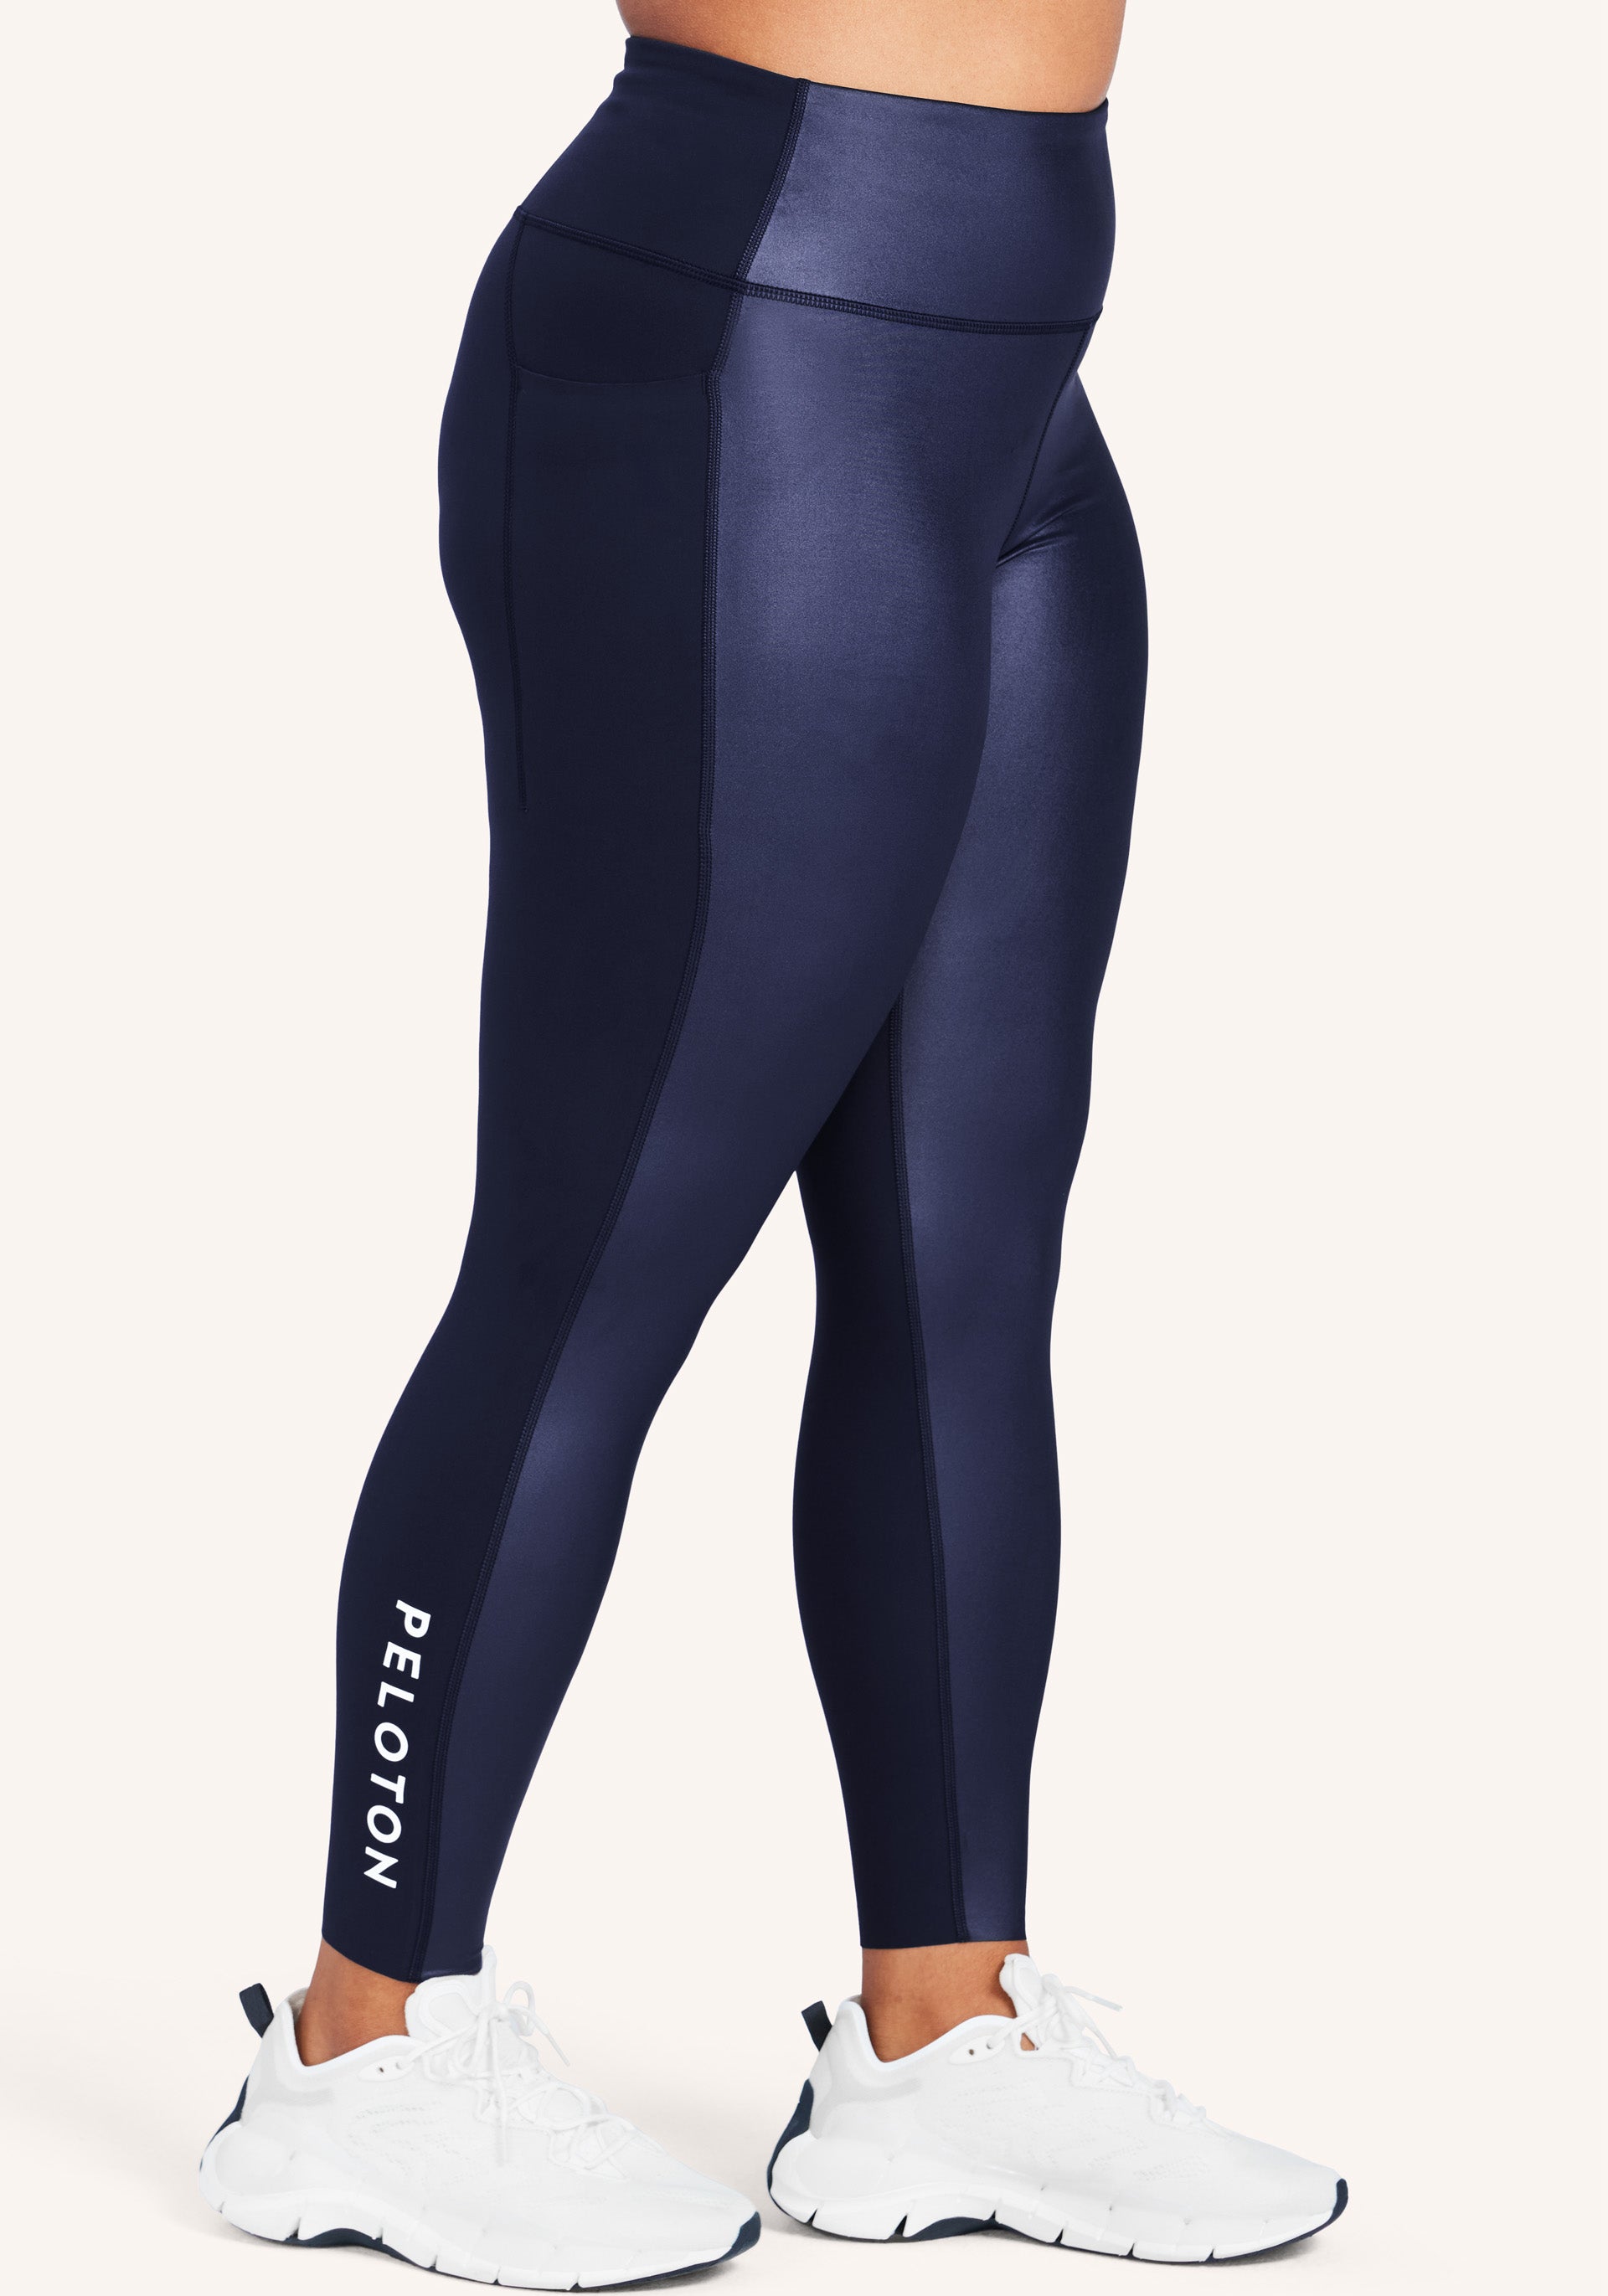 Cute Leggings: Peloton Standard Cadent High Rise 7/8 Legging, The Peloton  Bike Is Discounted For the  Prime Early Access Sale